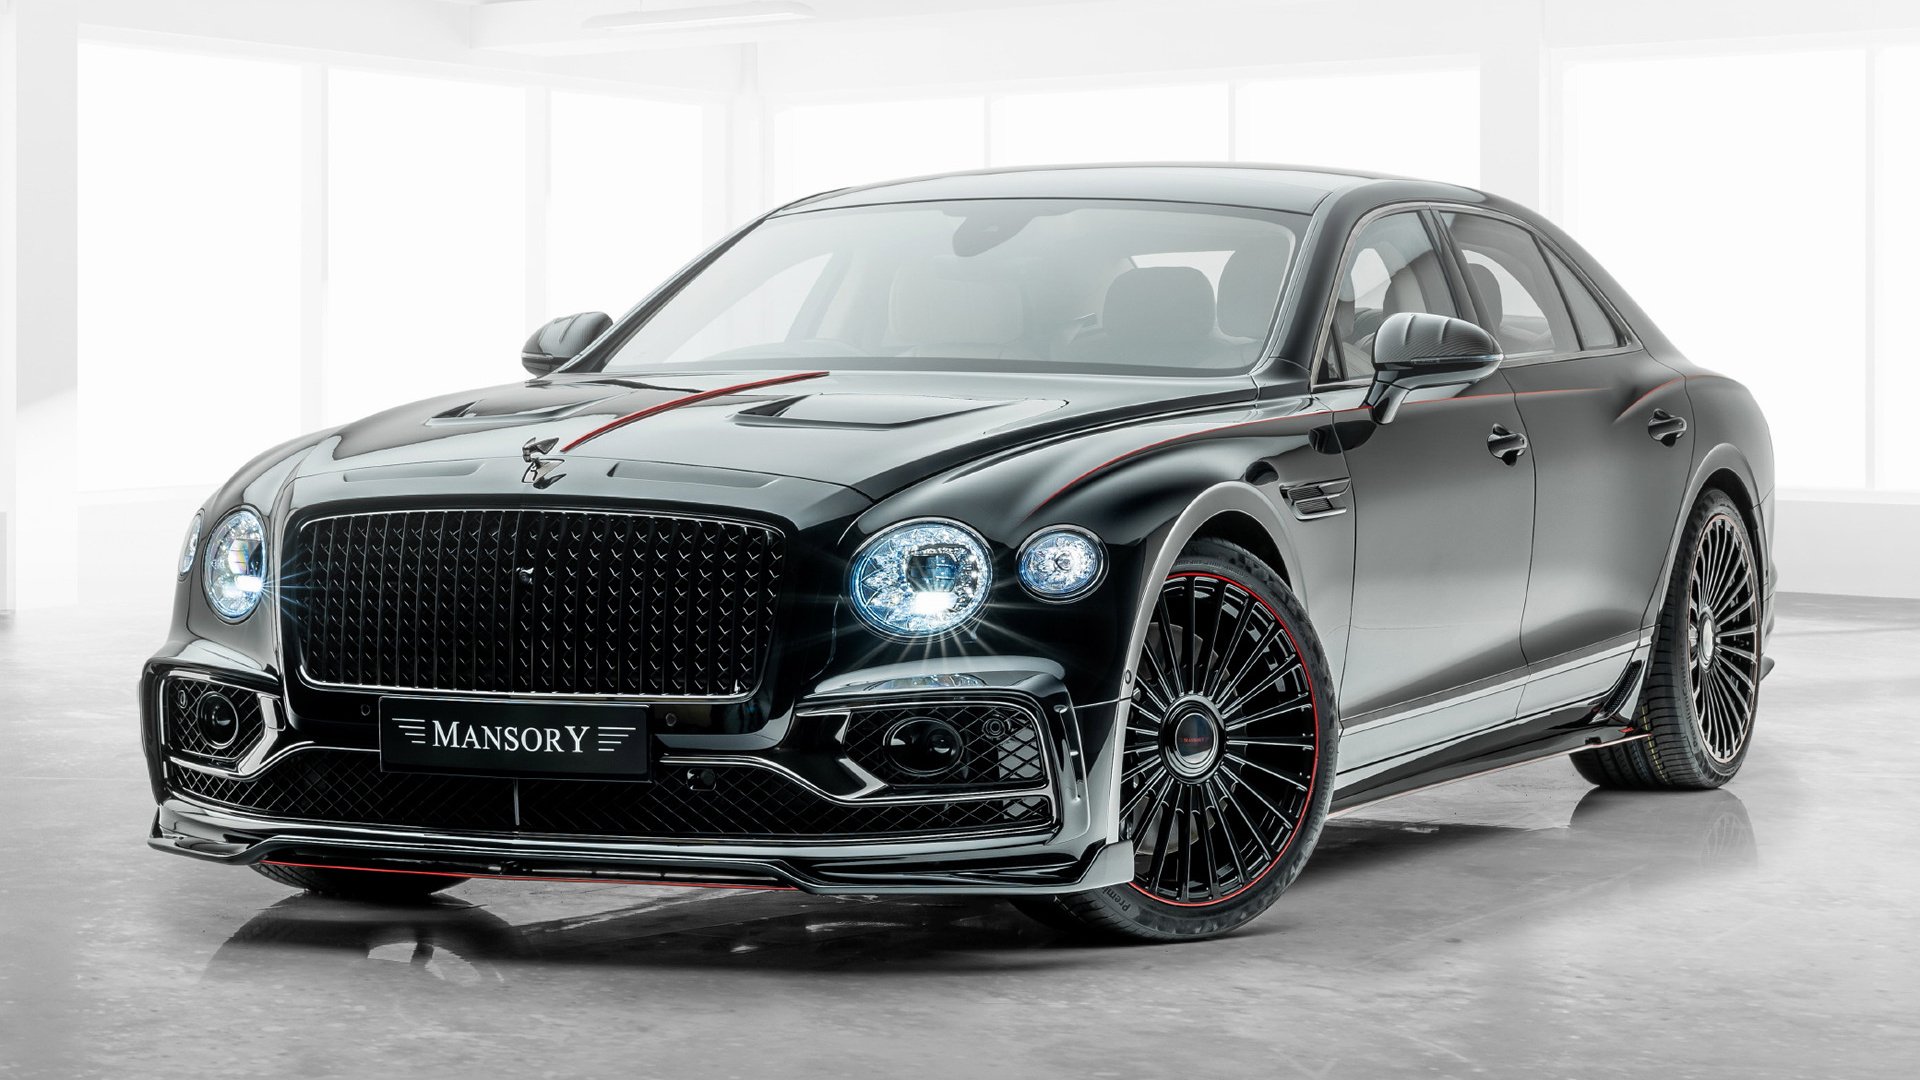 2020 Bentley Flying Spur By Mansory Hd Wallpaper Background Image 1920x1080